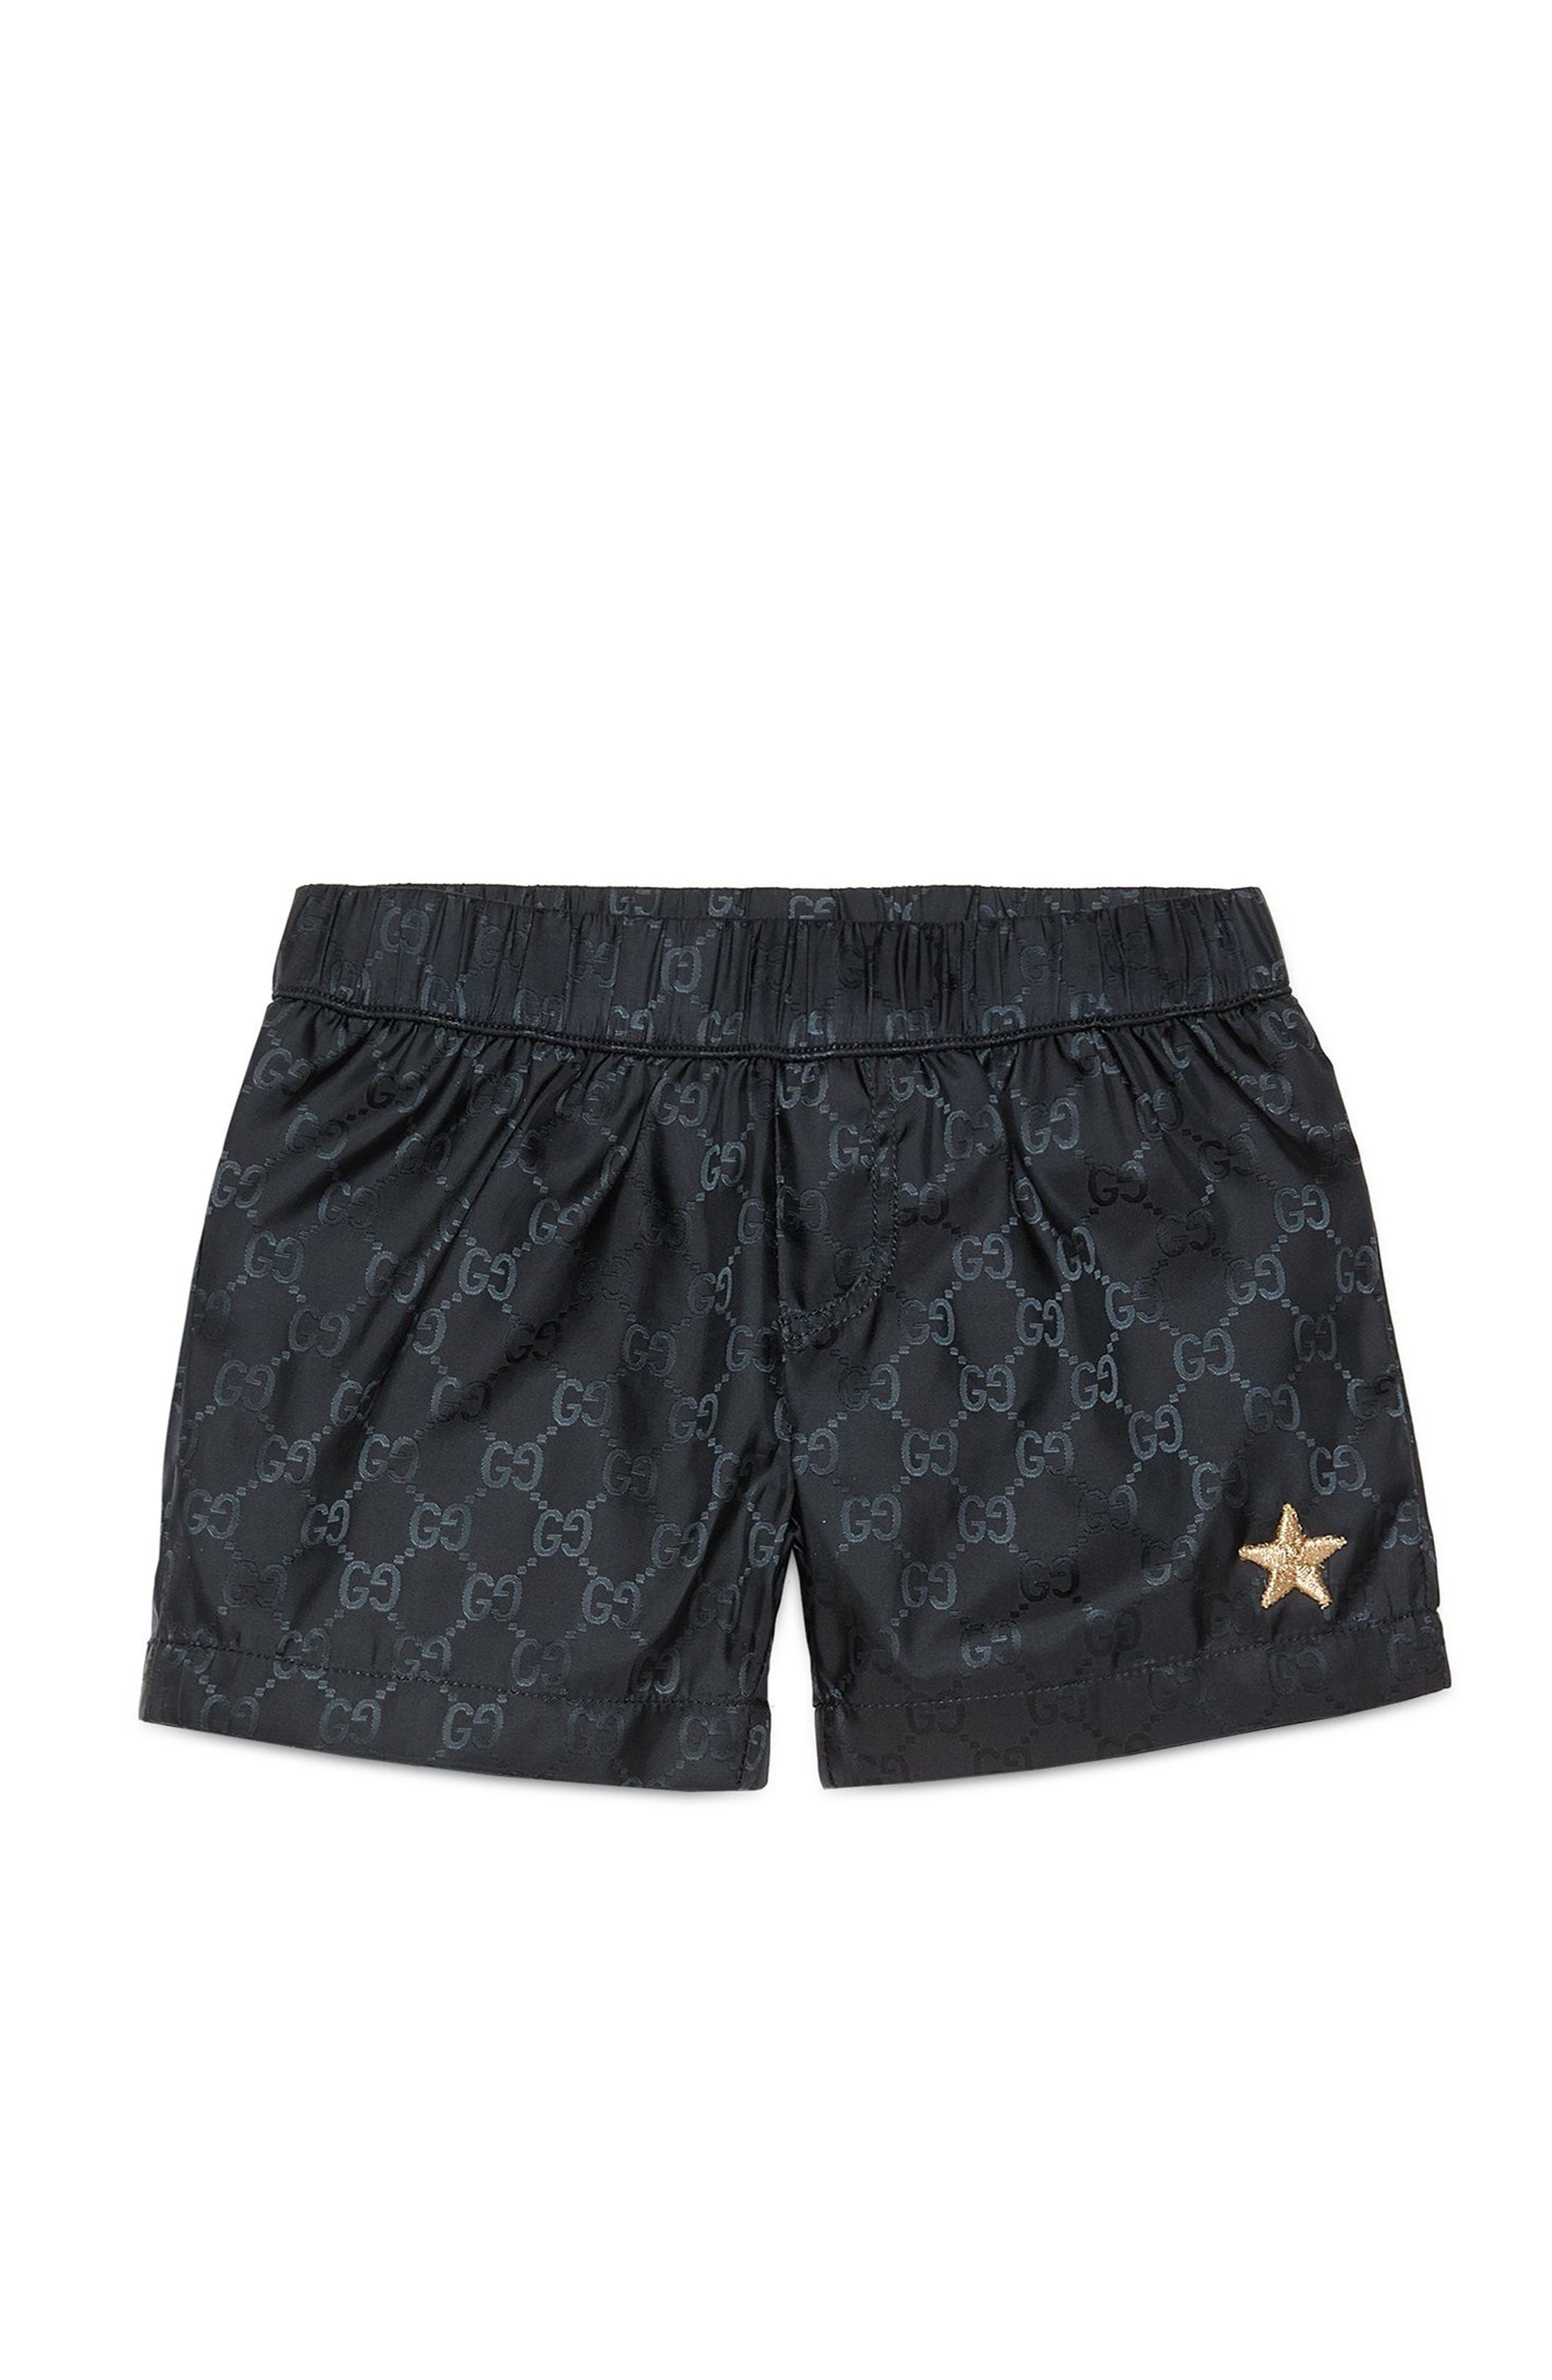 gucci swim trunks for toddlers